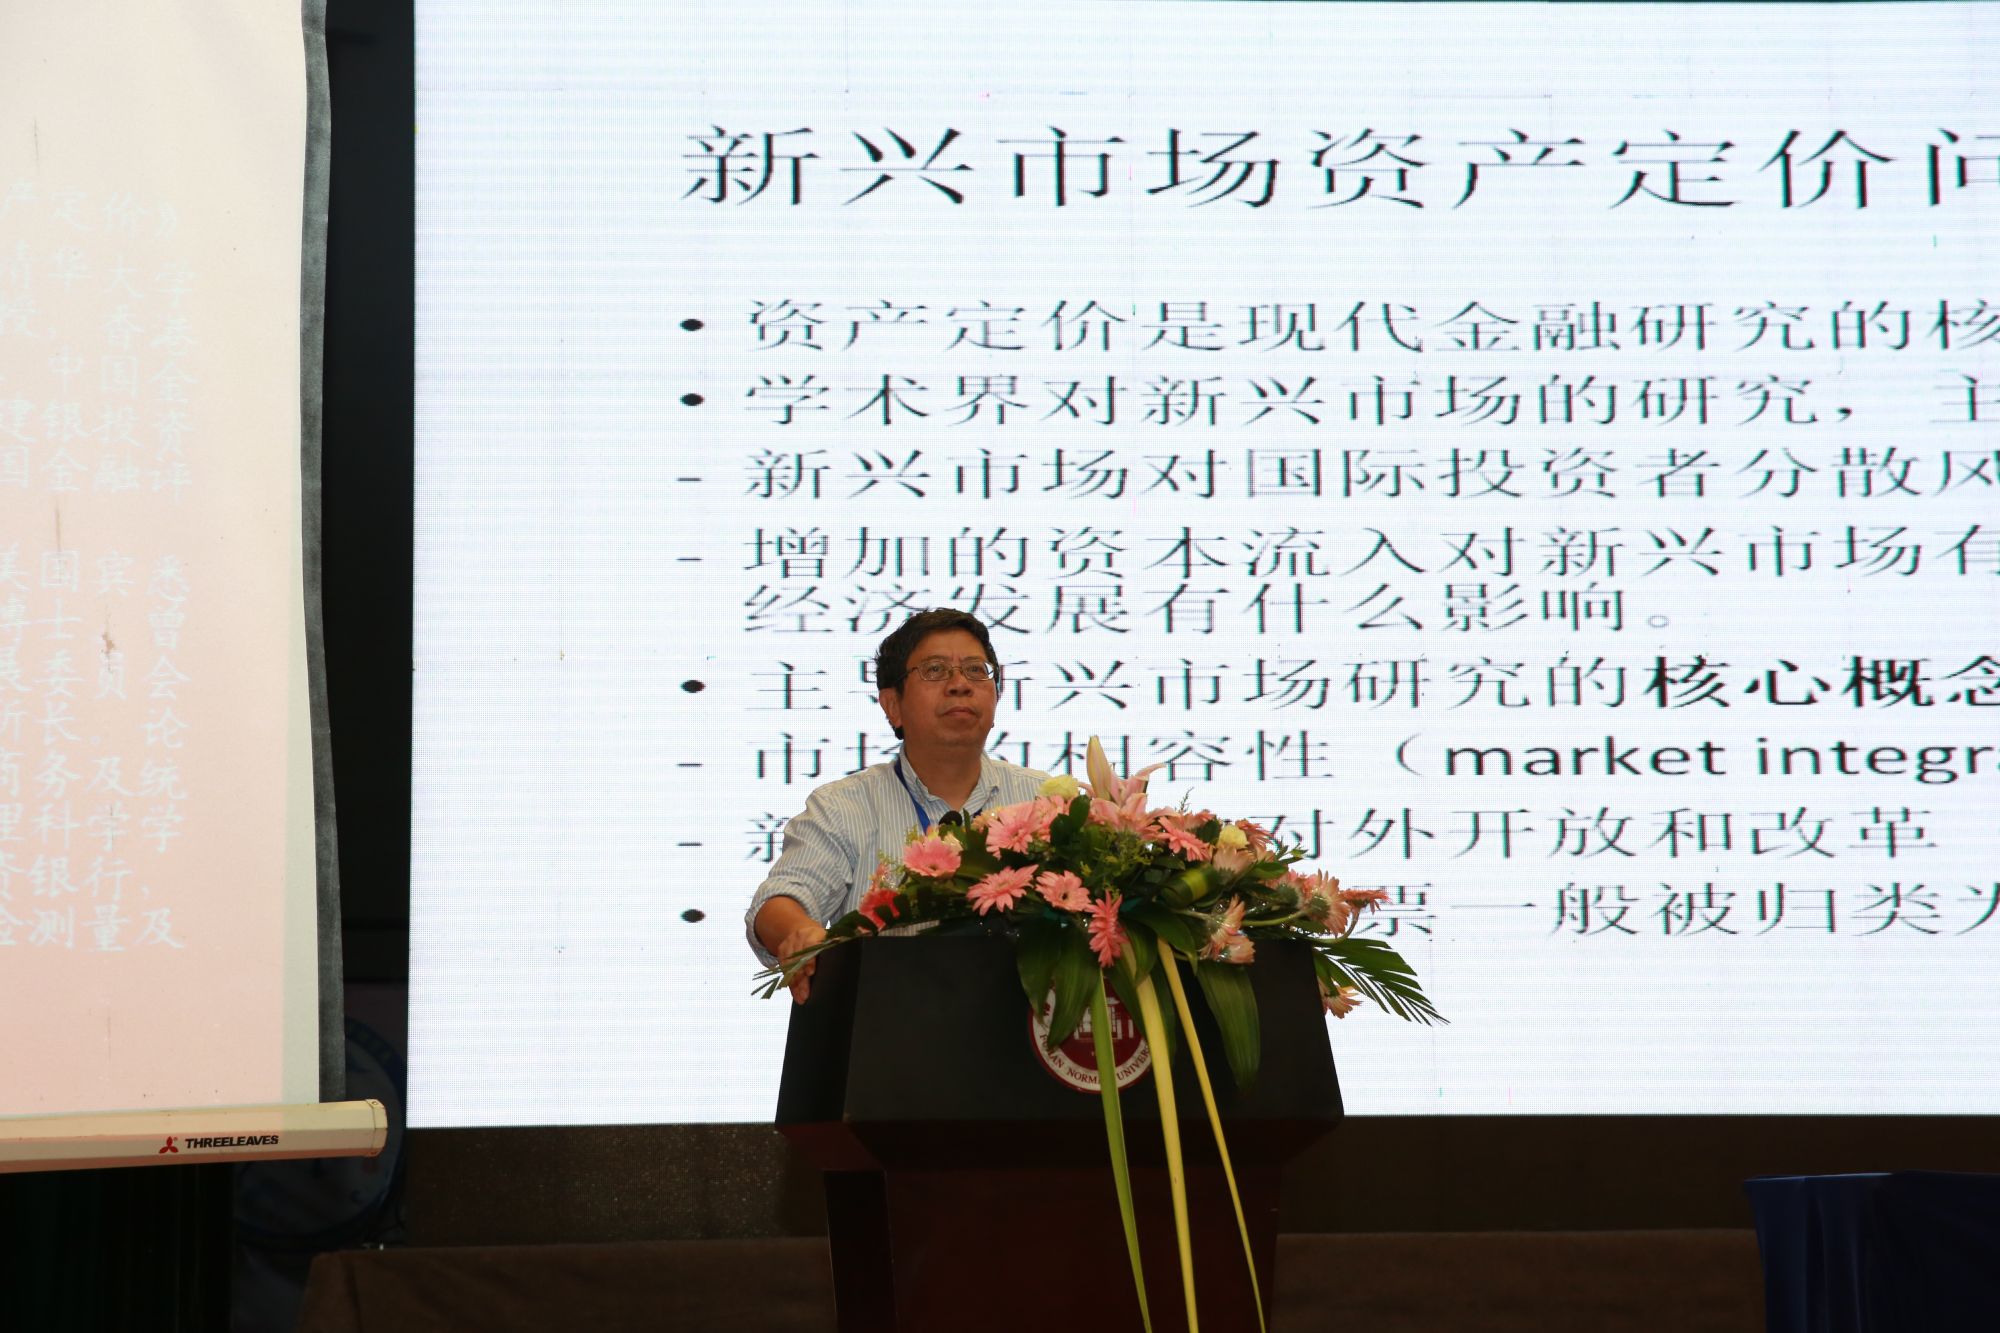 SUSTC Professor He Jia Gave Keynote Speech at 2015 Annual Meeting of the Chinese Association of Quantitative Economics